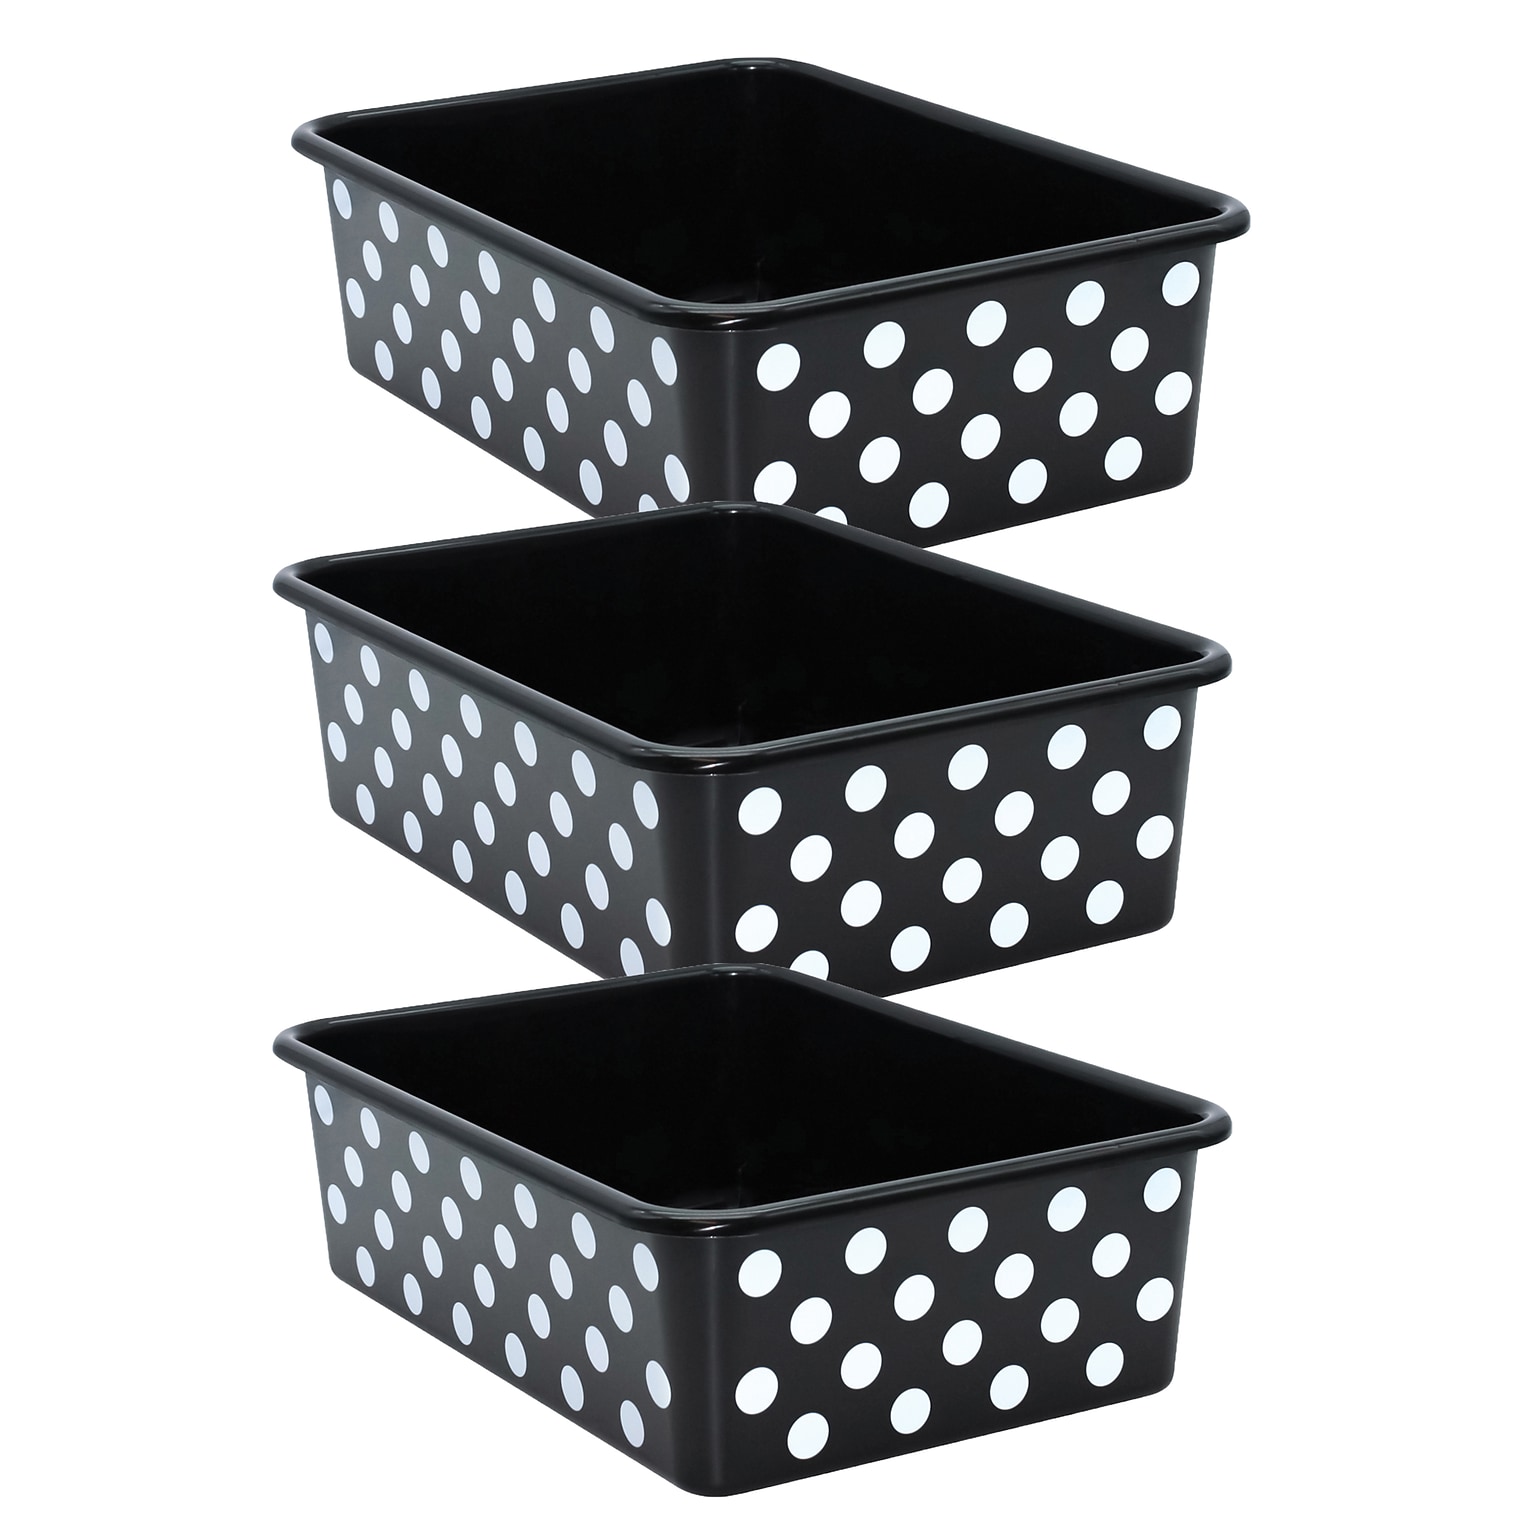 Teacher Created Resources® Plastic Storage Bin, Large, 16.25 x 11.5 x 5, White Polka Dots on Black, Pack of 3 (TCR20420-3)